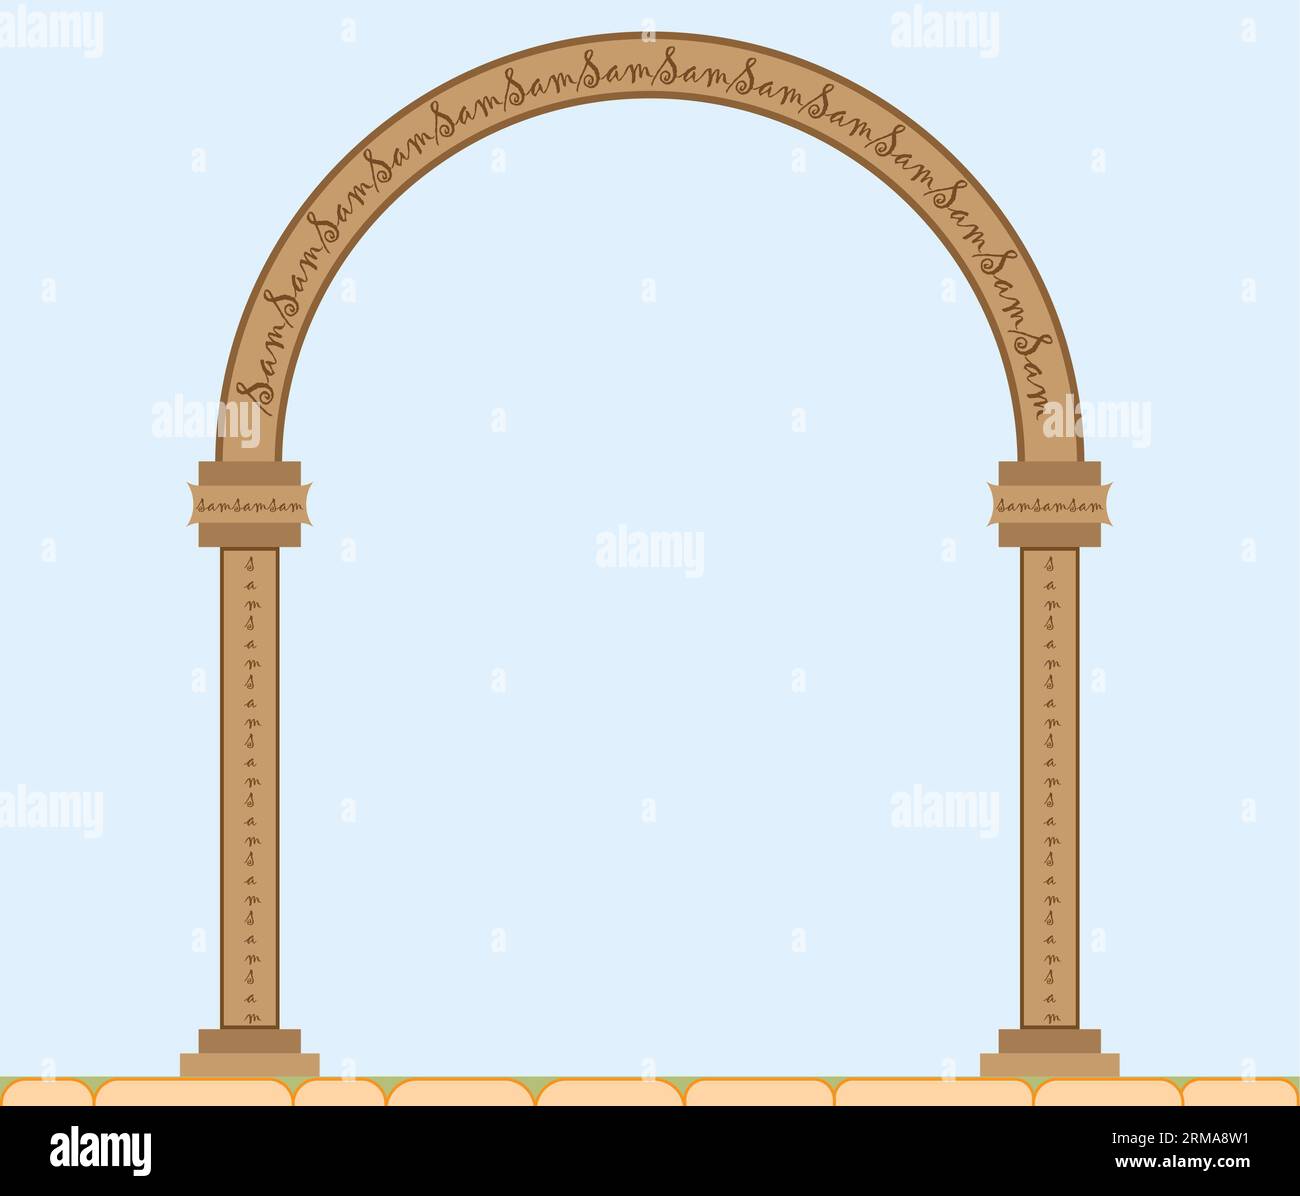 Architectural arch made from brown stones illustration, ruins and archeology, Roman architecture style, Greek architecture style Stock Photo